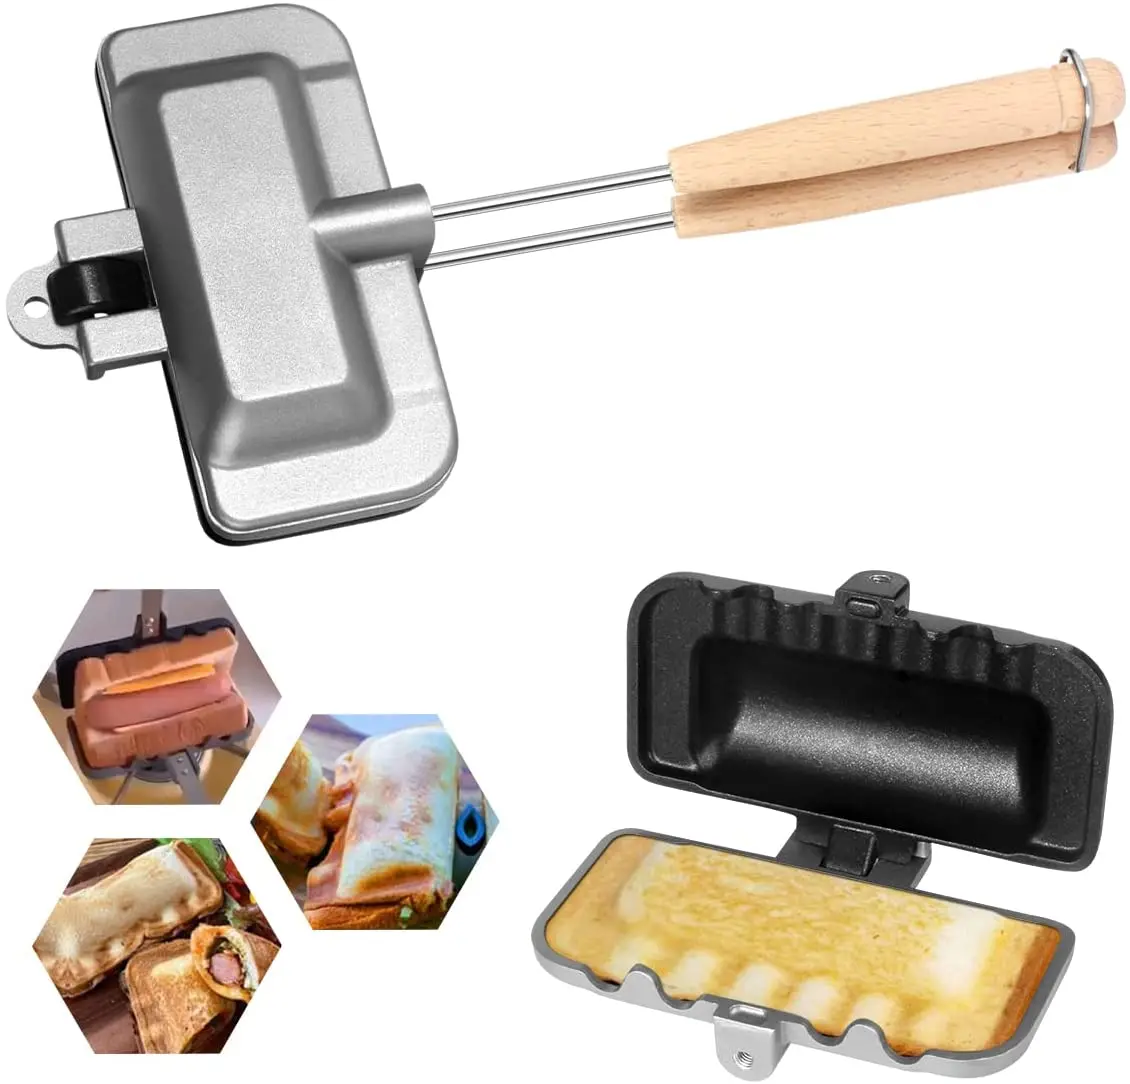 Sandwich Maker, Double Sided Frying Pan, Flip Grill Pan for Breakfast Pancakes Hot Dog Toaster